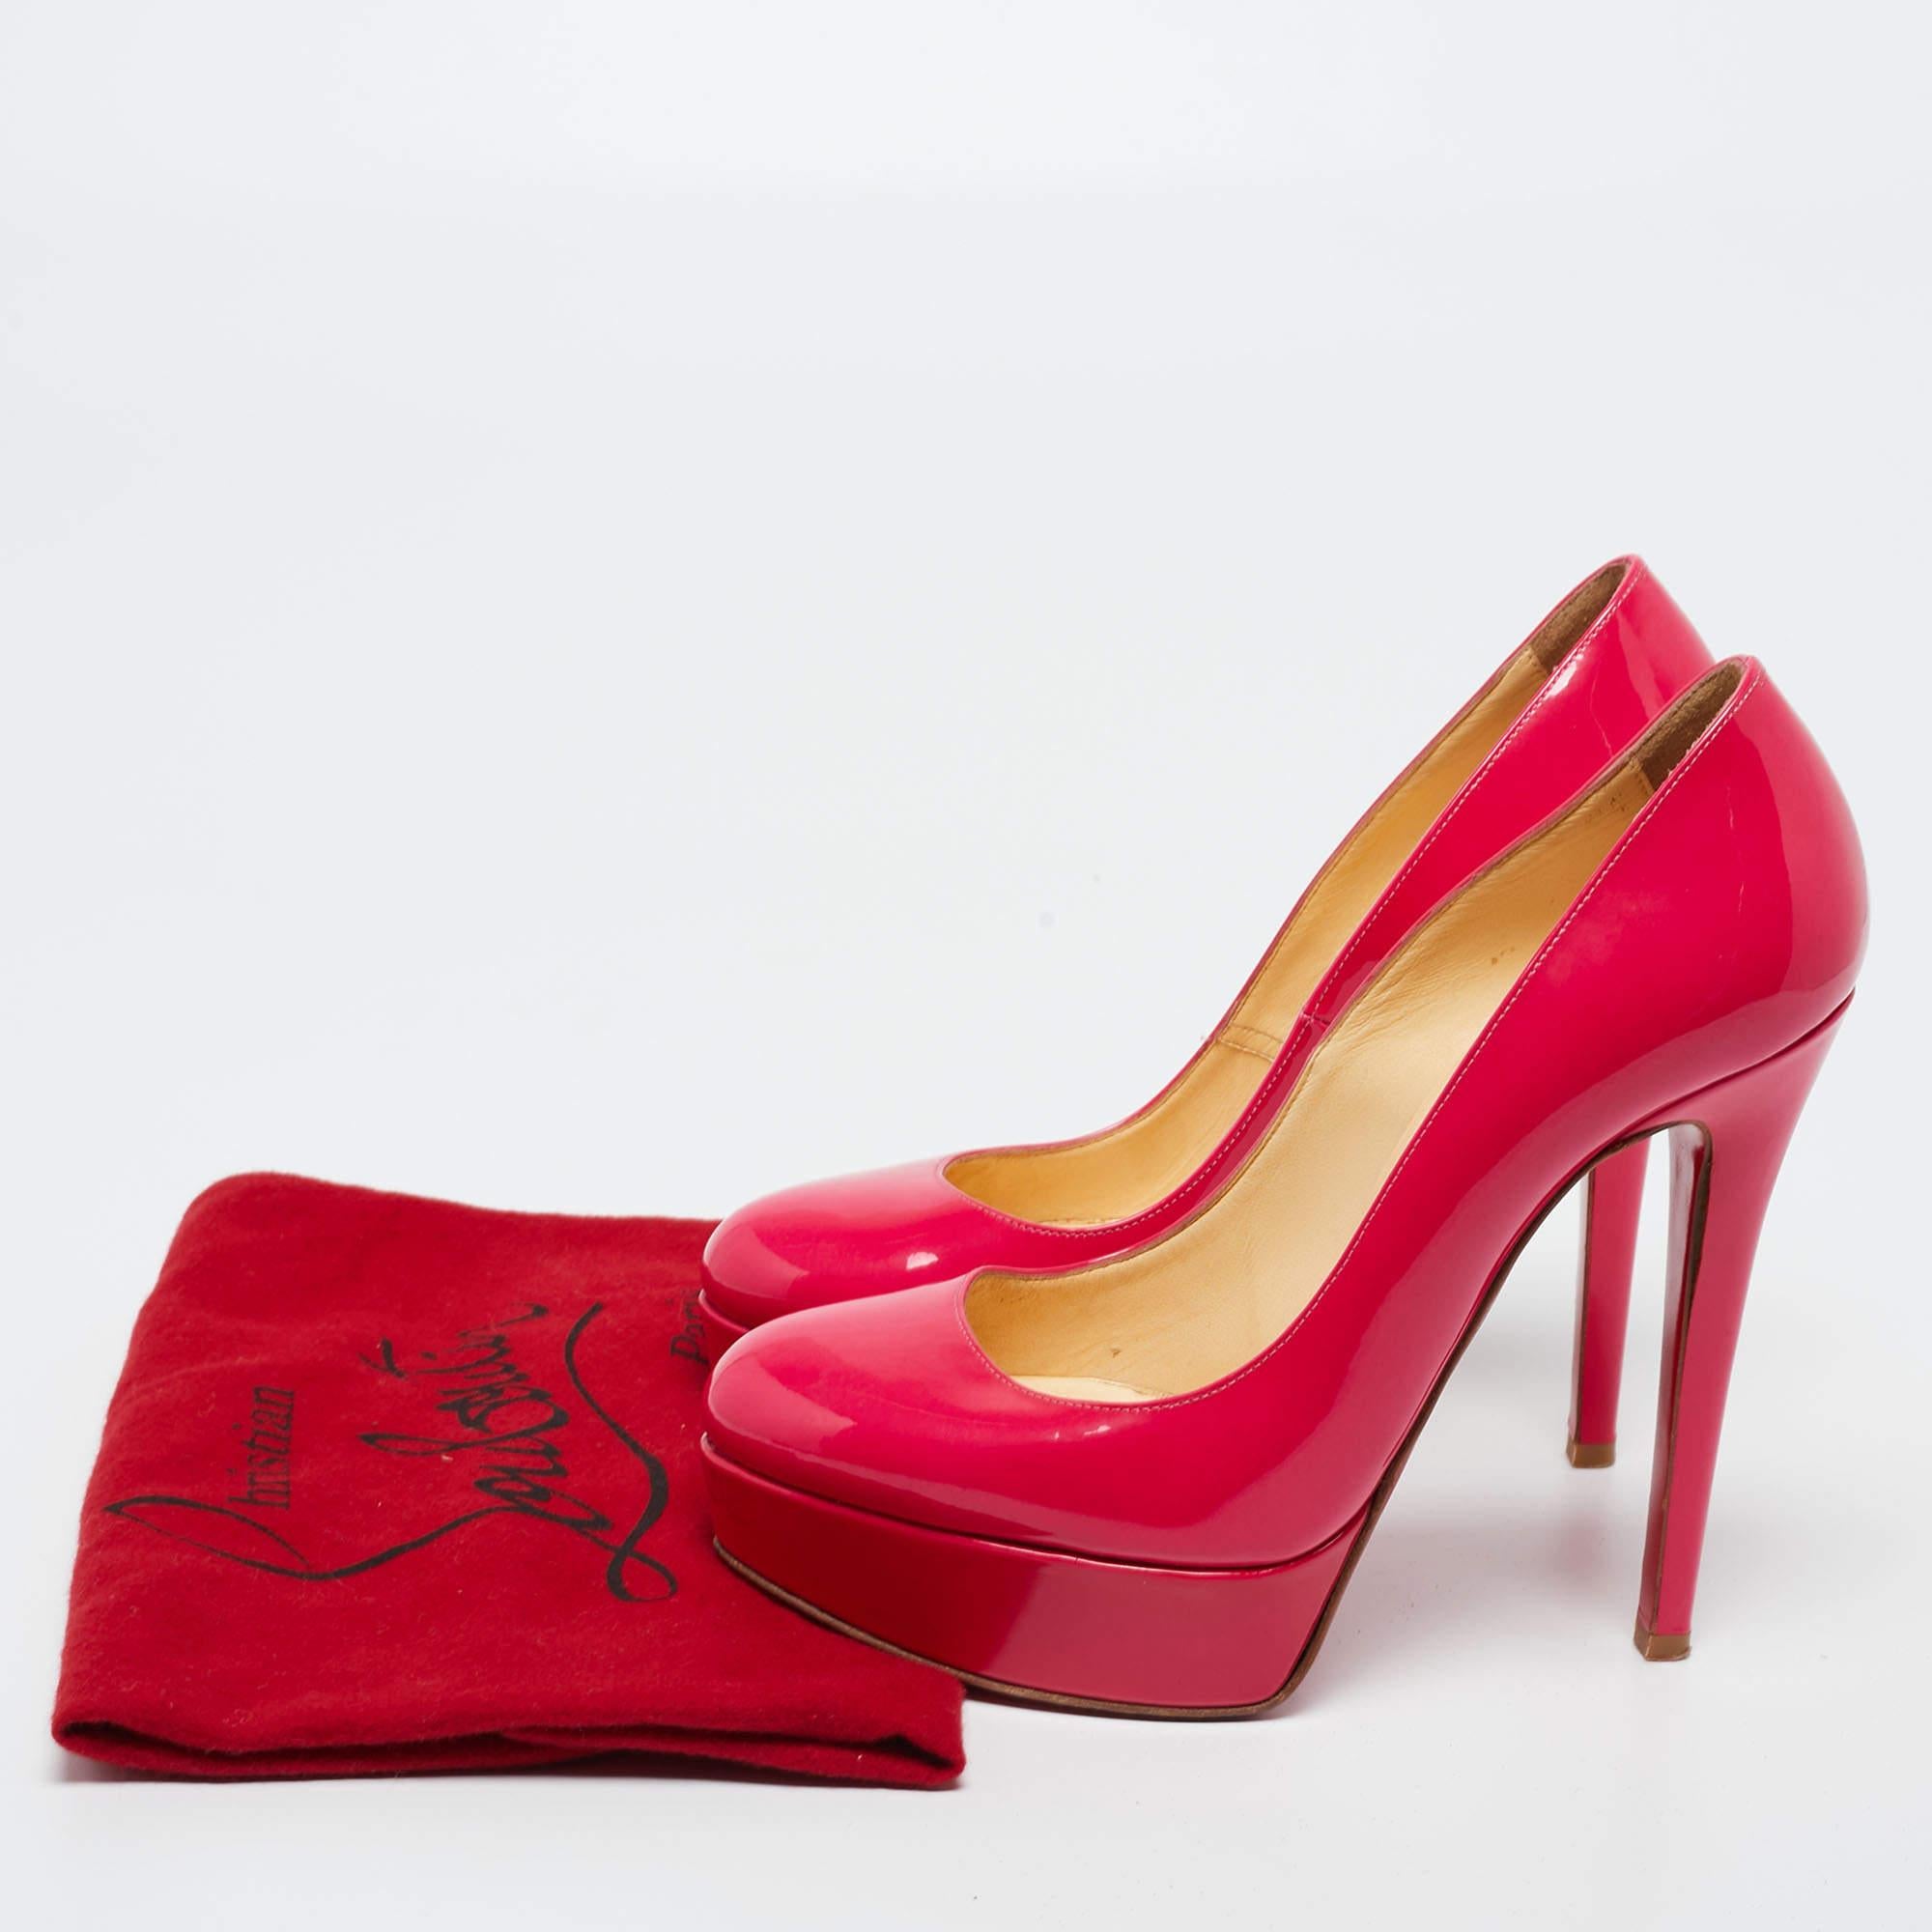 Christian Louboutin Neon Pink Patent Leather Bianca Pumps Size 36 For Sale 6